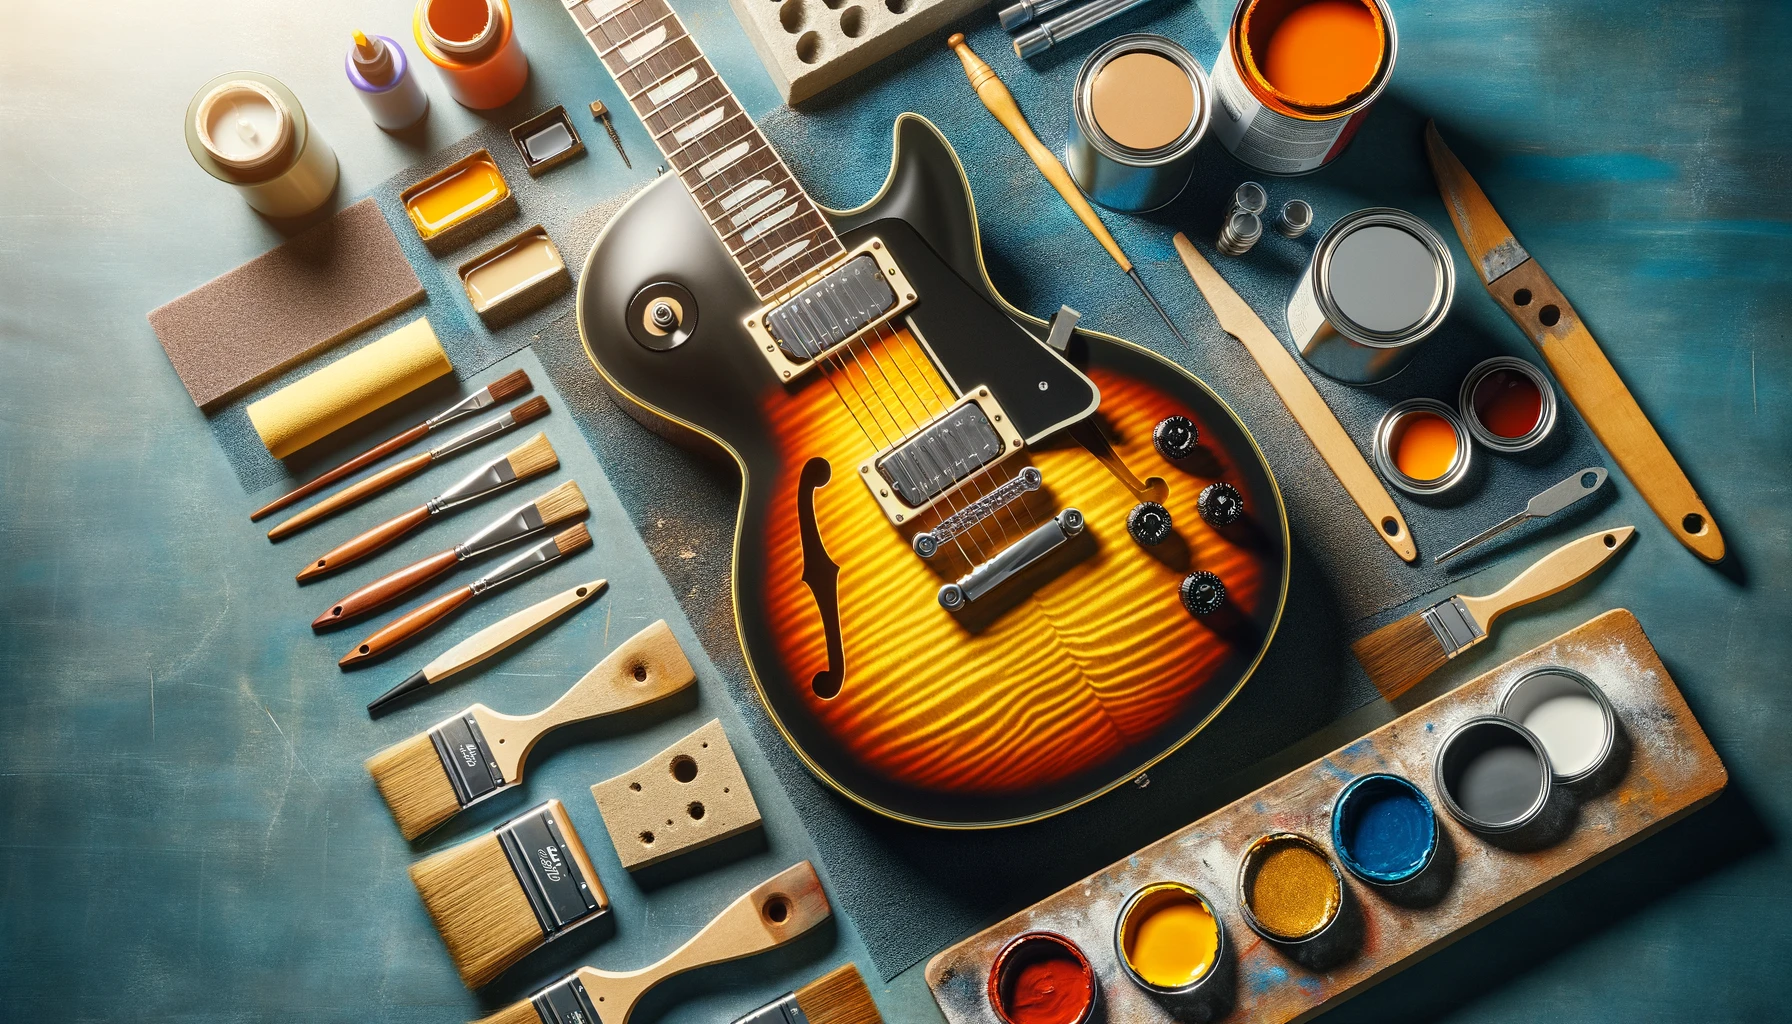 How I Transformed My Guitar with a Custom Paint Job